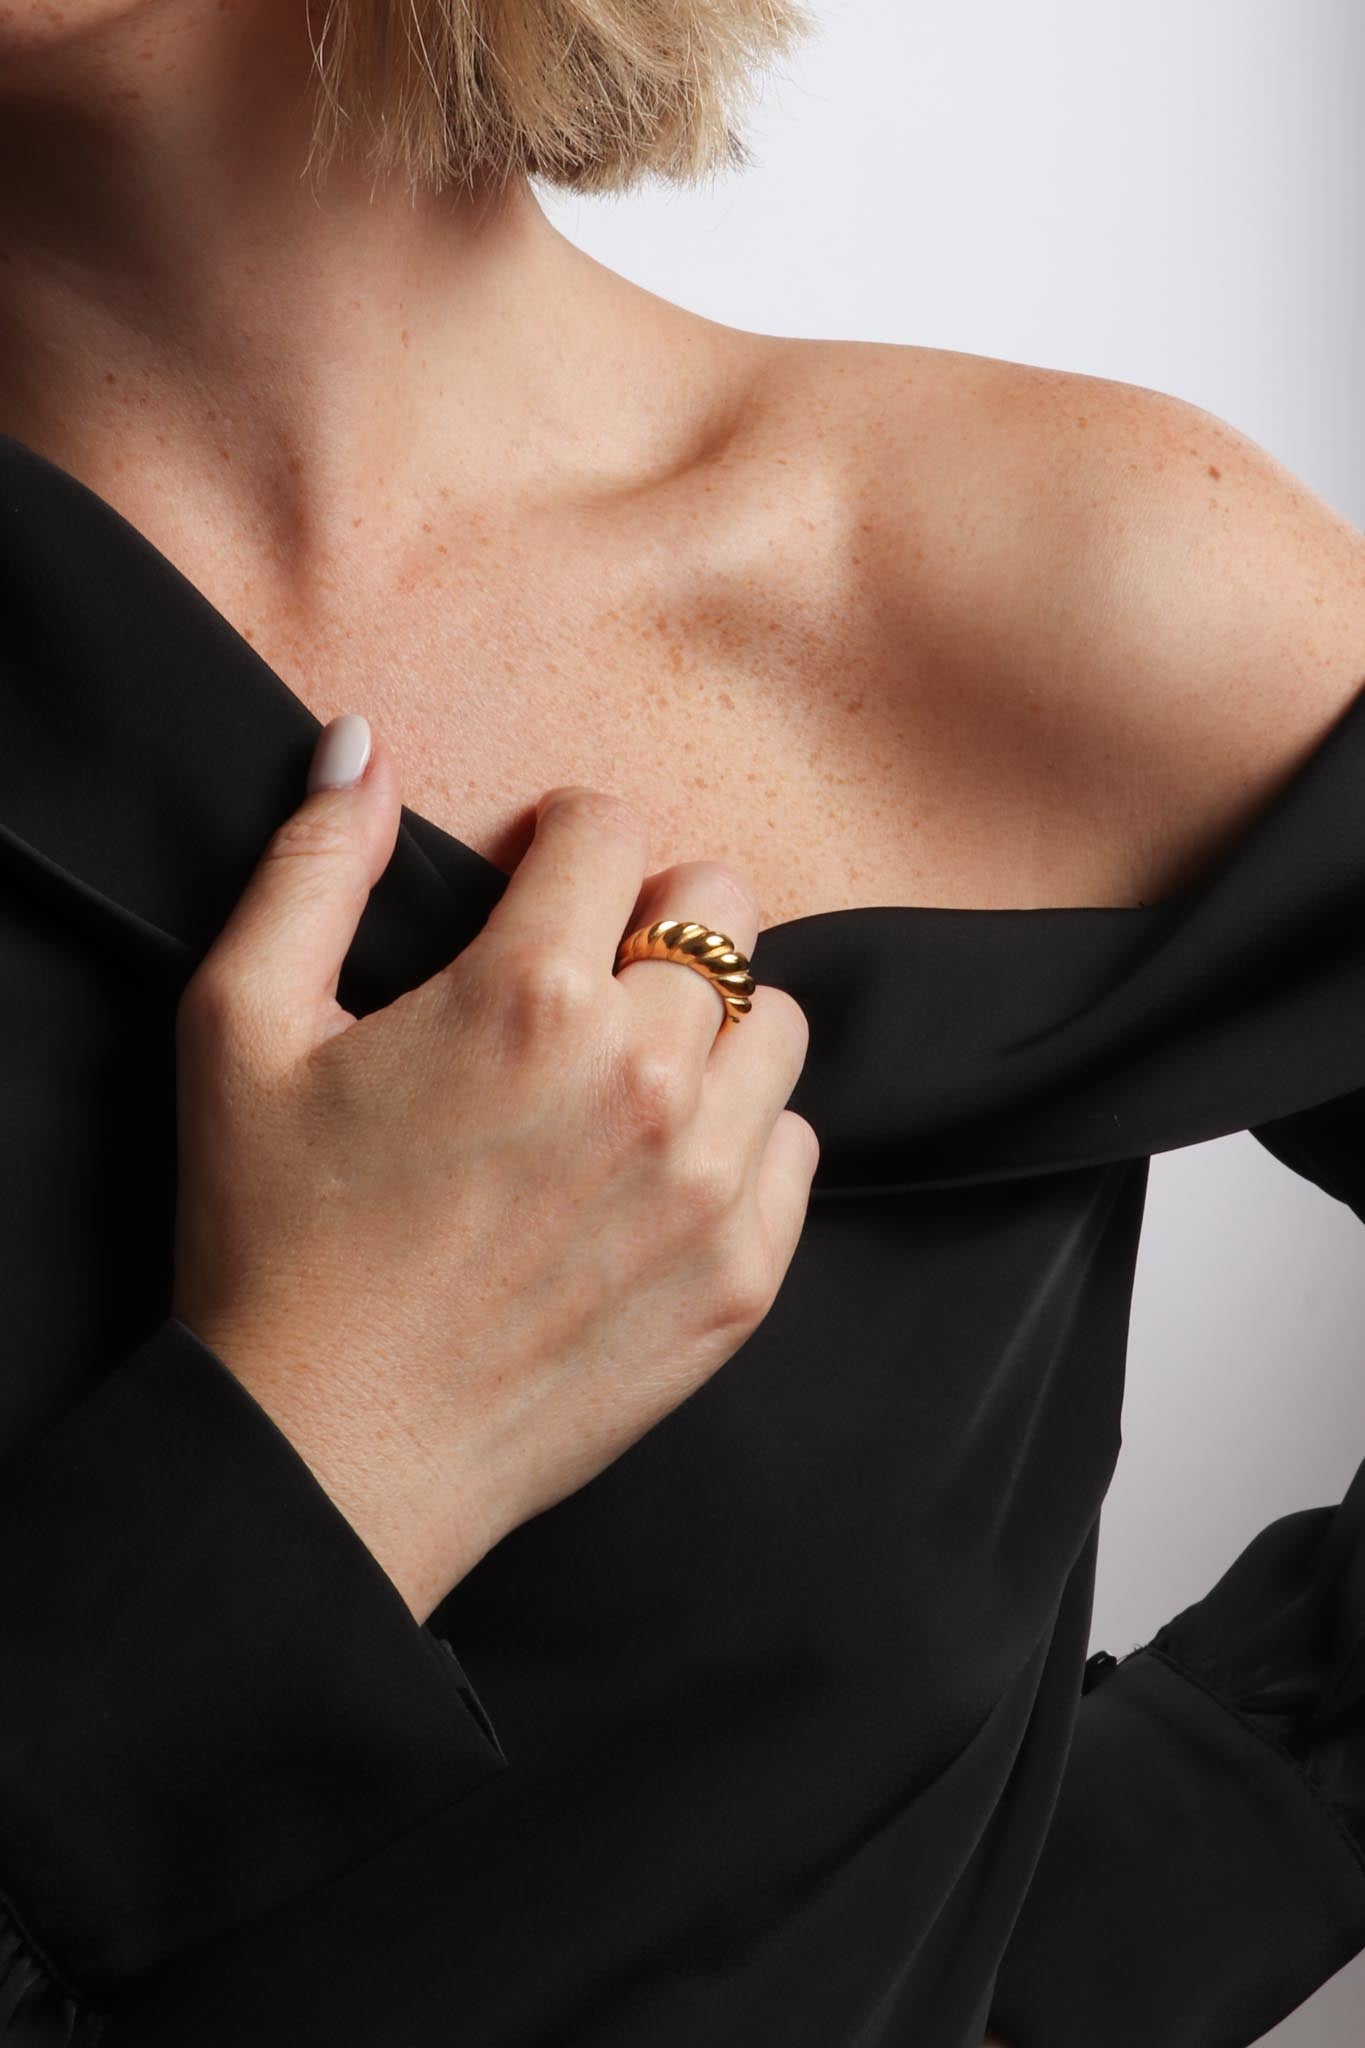 Marrin Costello wearing Marrin Costello Jewelry Rita Ring croissant crescent classic statement ring. Available in sizes 6, 7, 8. Waterproof, sustainable, hypoallergenic. 14k gold plated stainless steel.